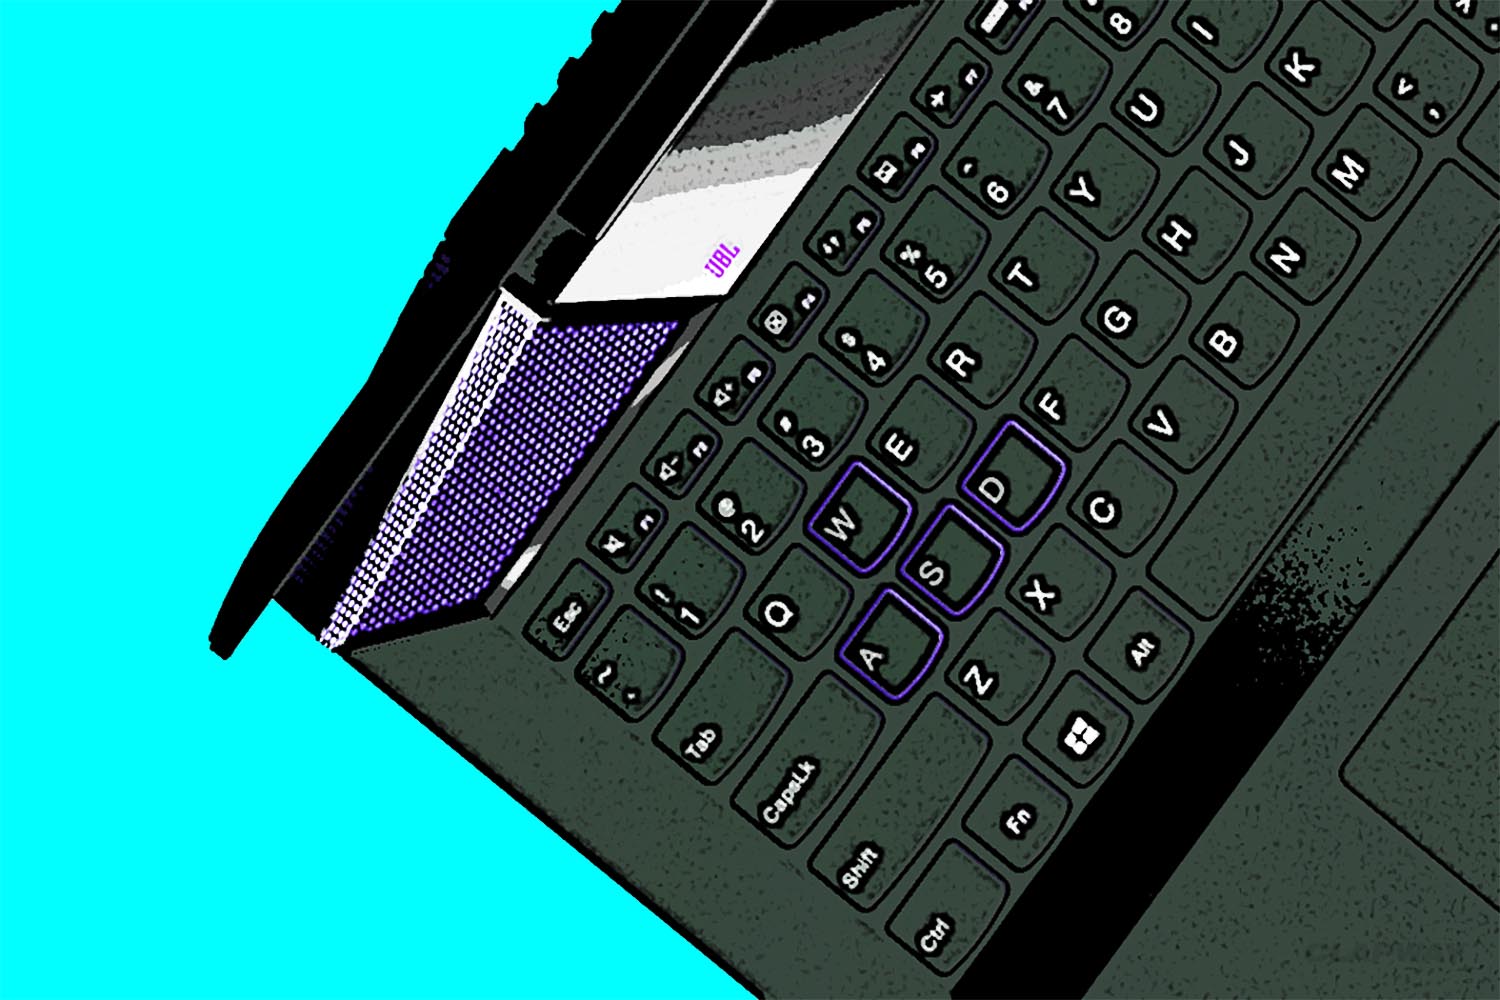  2 Reasons Why Lenovo Is Doing More Than Selling Laptops Clapway